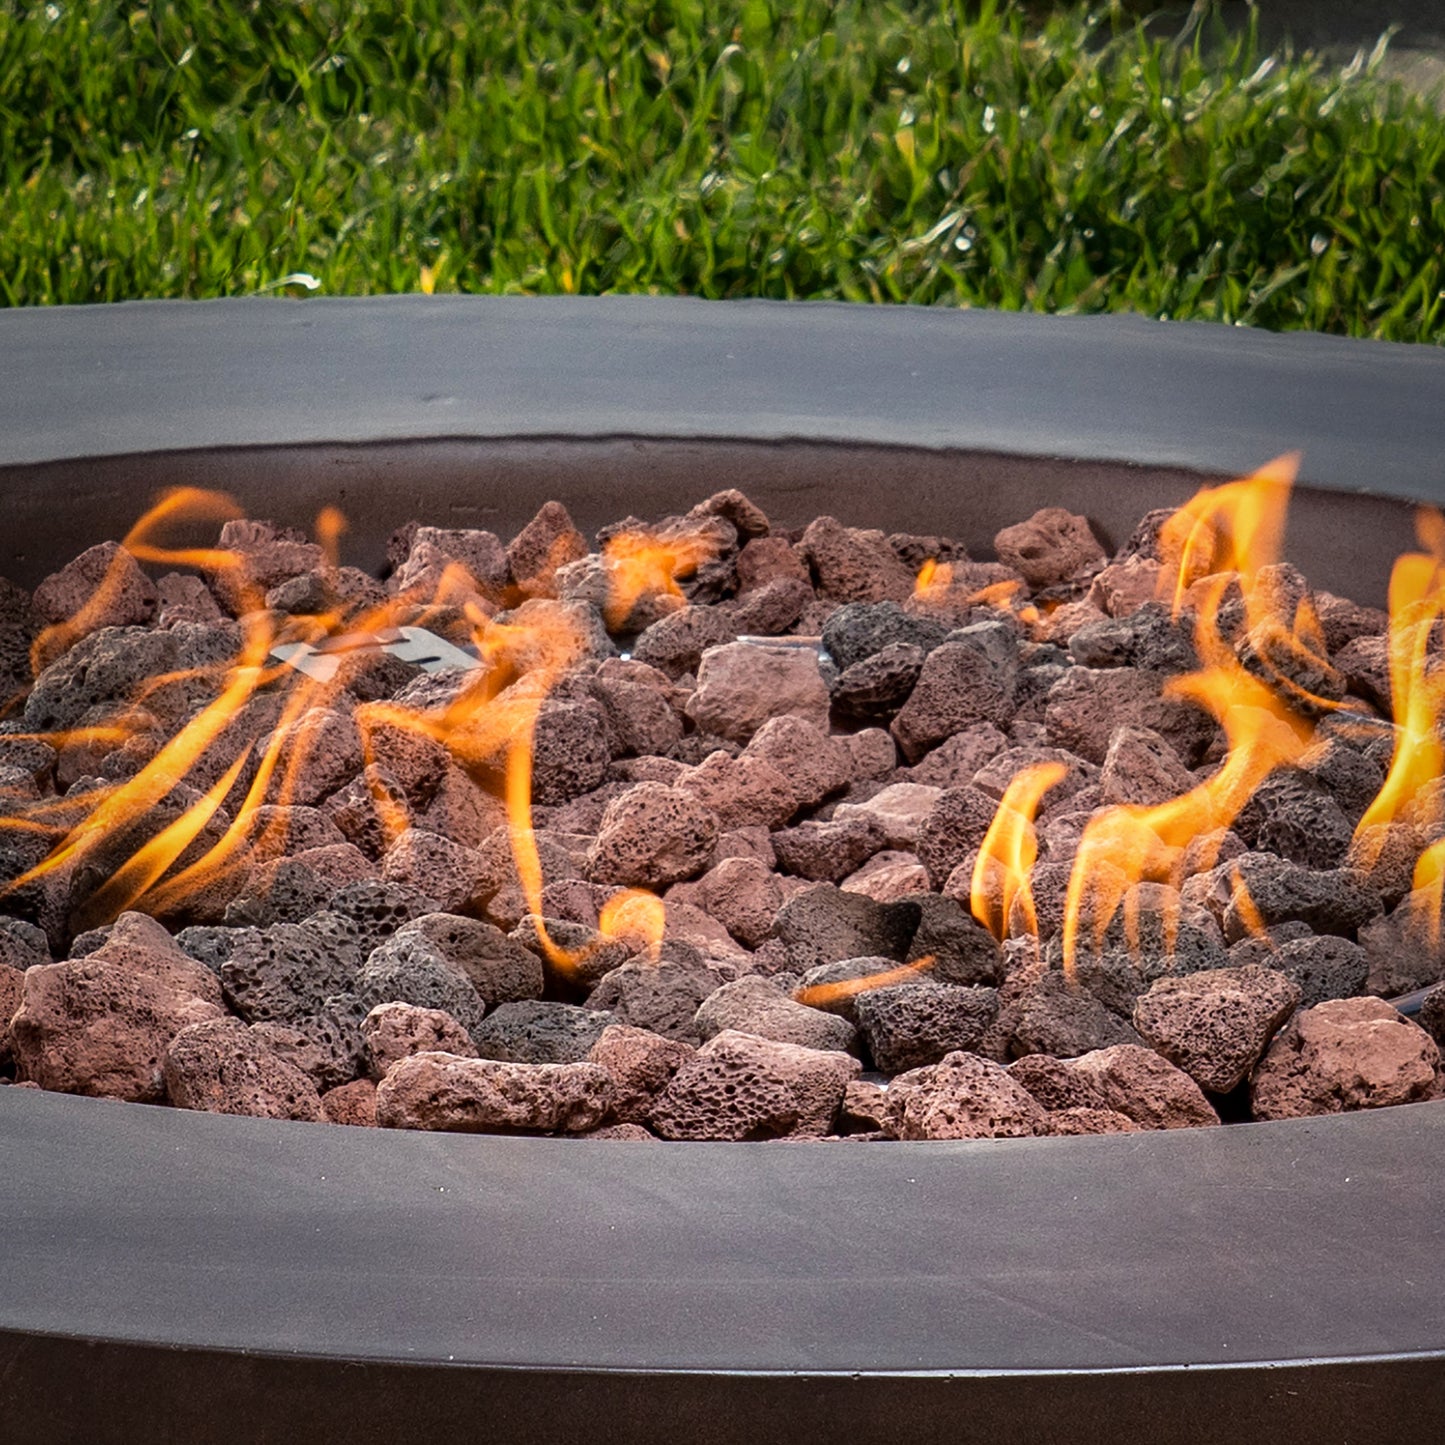 Round Fire Pit Table